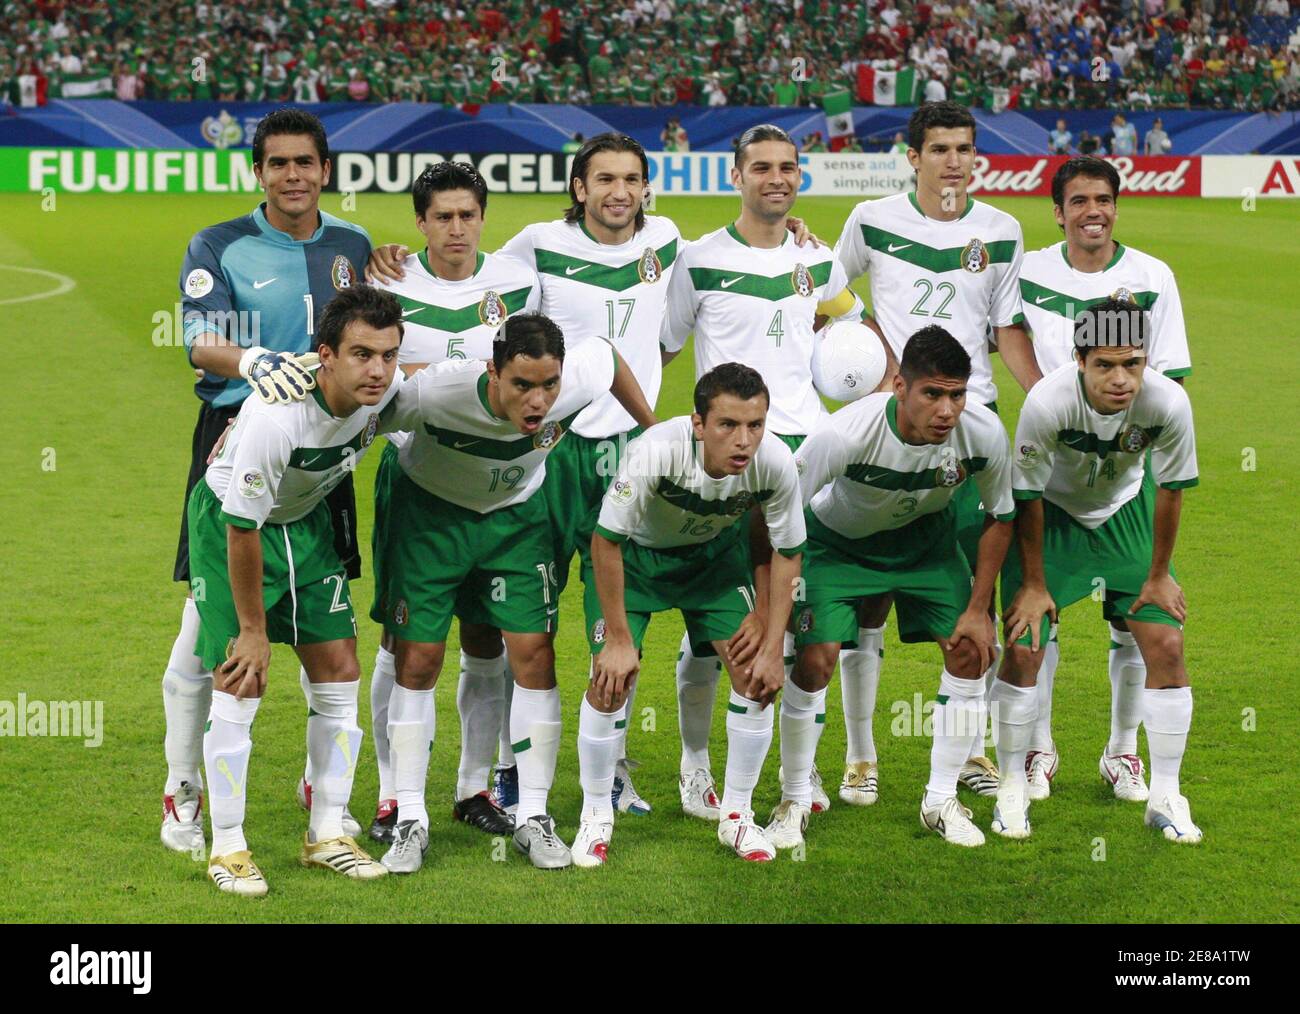 Mexico's national soccer team players pose for a team photo before their Group D World Cup 2006 soccer match against [Portugal] in Gelsenkirchen June 21, 2006. Back row from left: Oswaldo Sanchez,